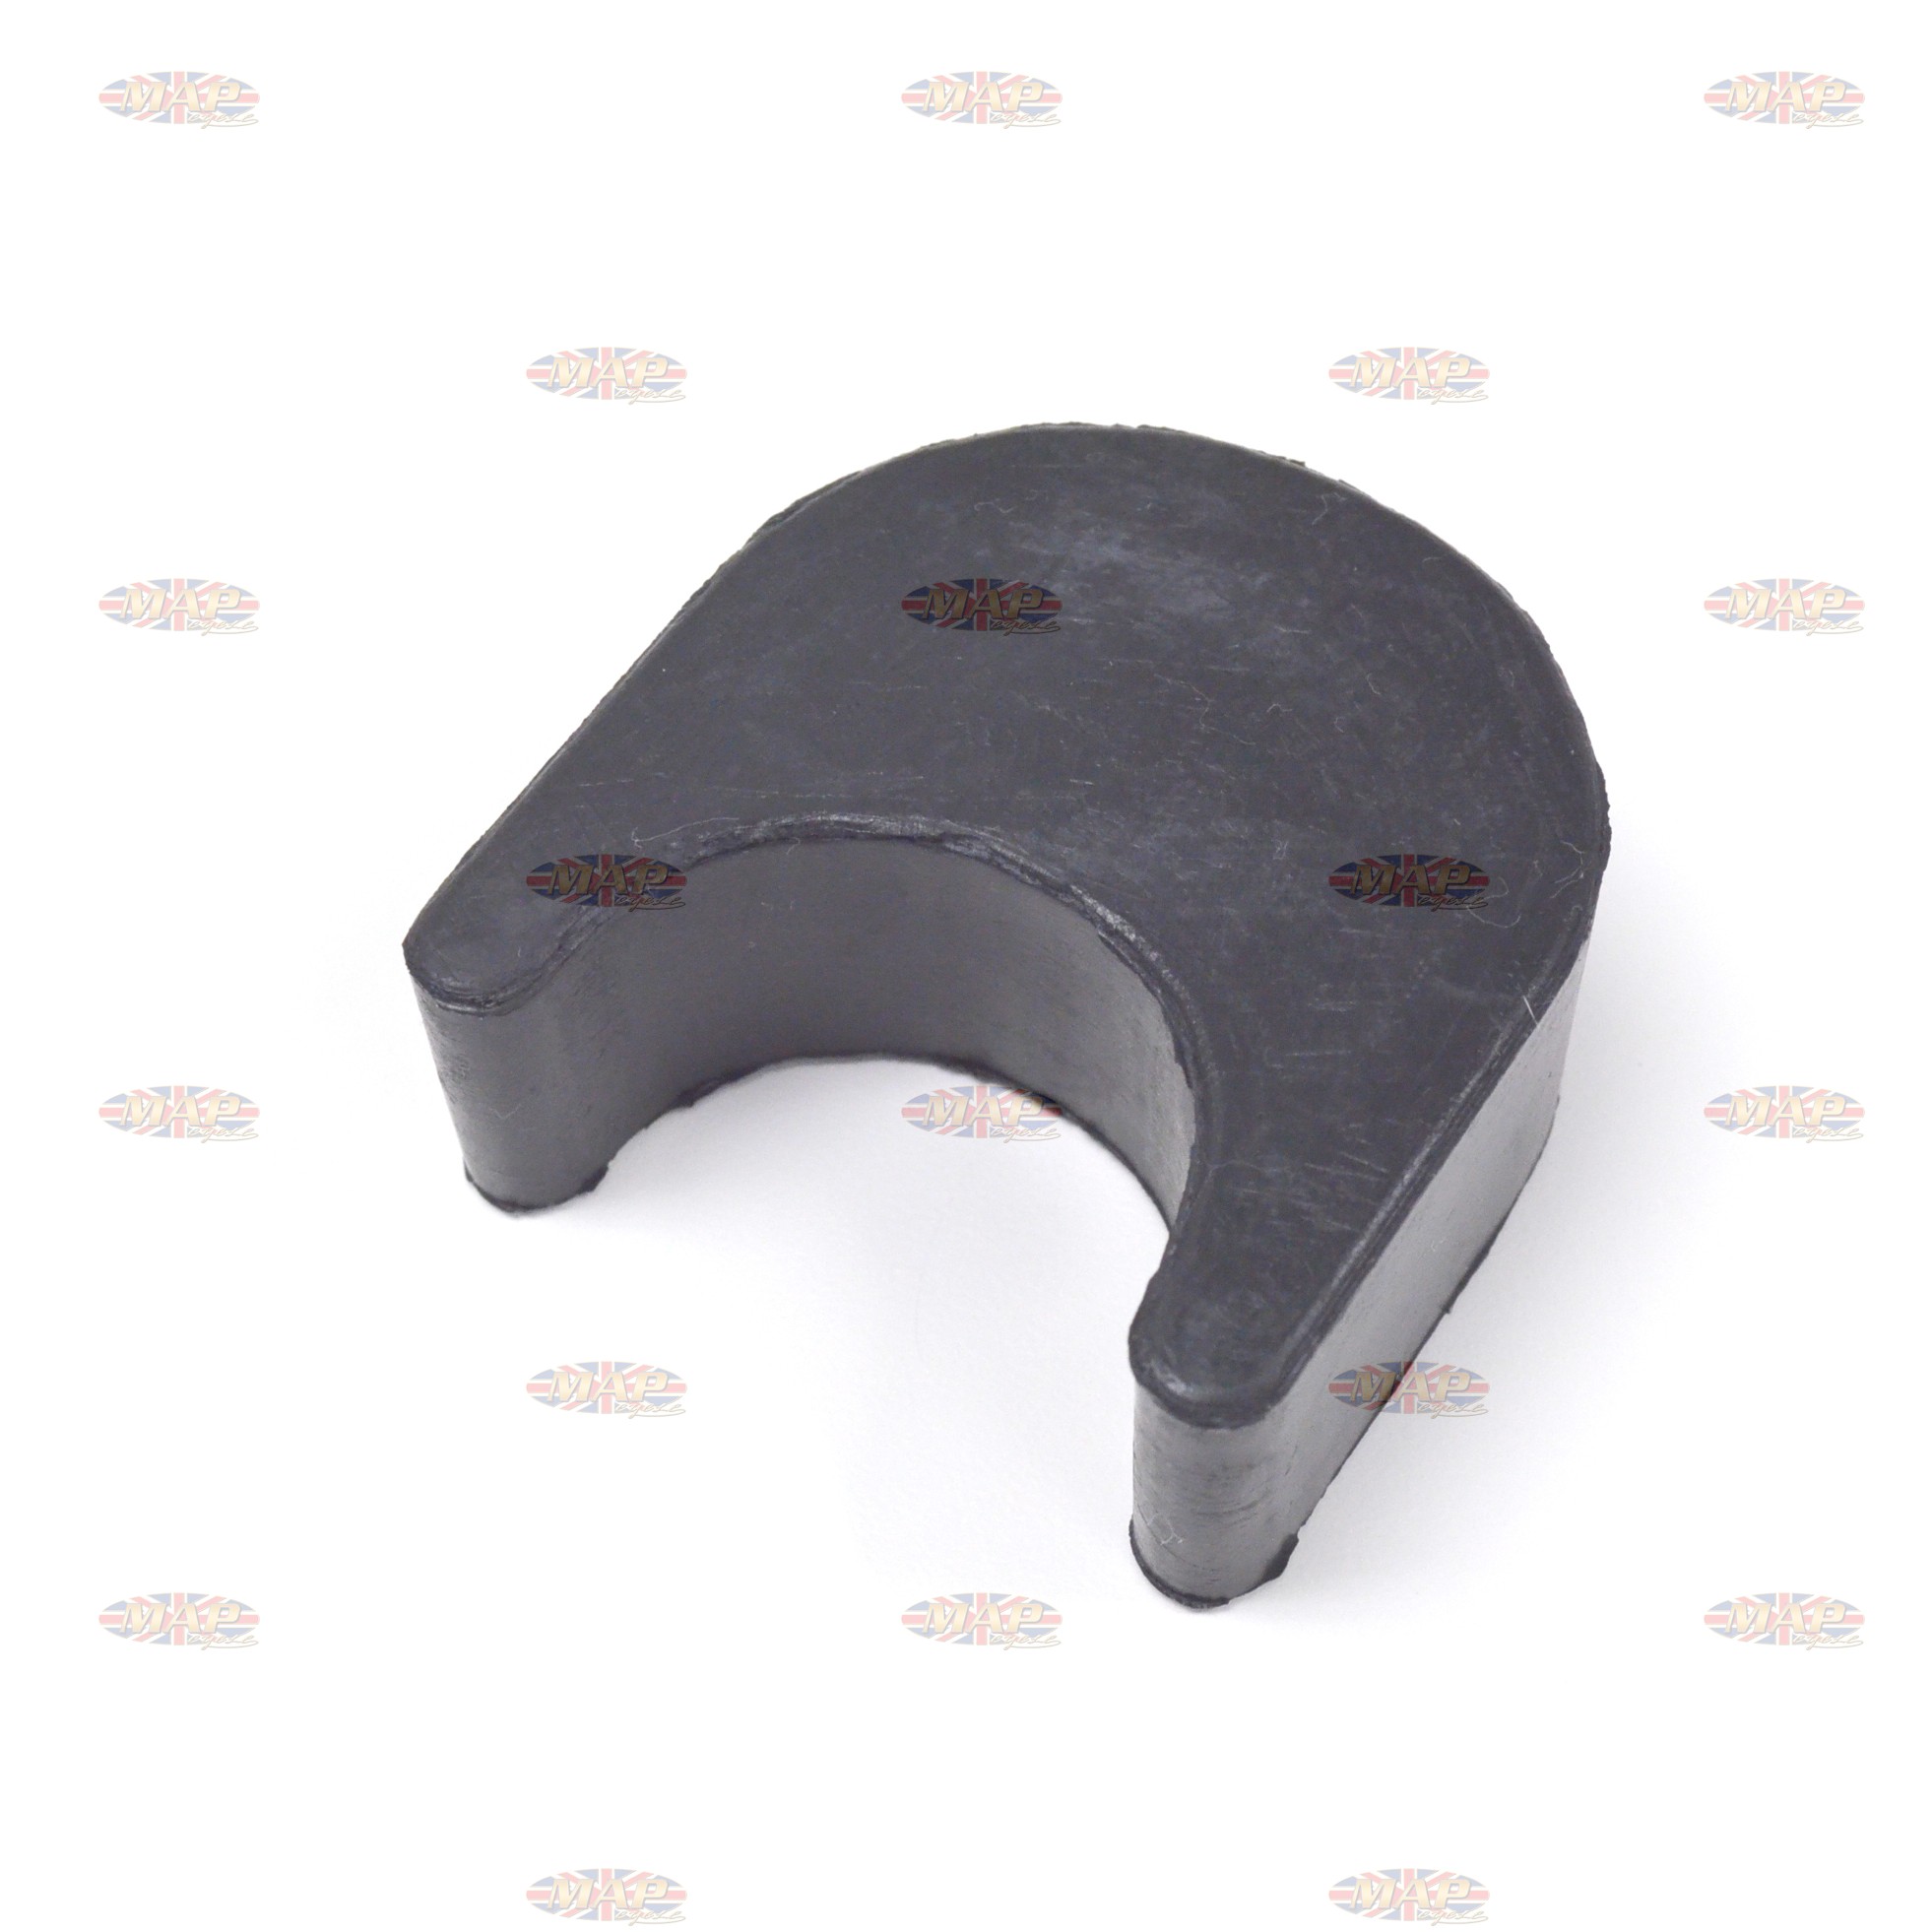 BSA A50 A65 Gas Tank Front Support Rubber For 2 Gallon Tanks 68-8110